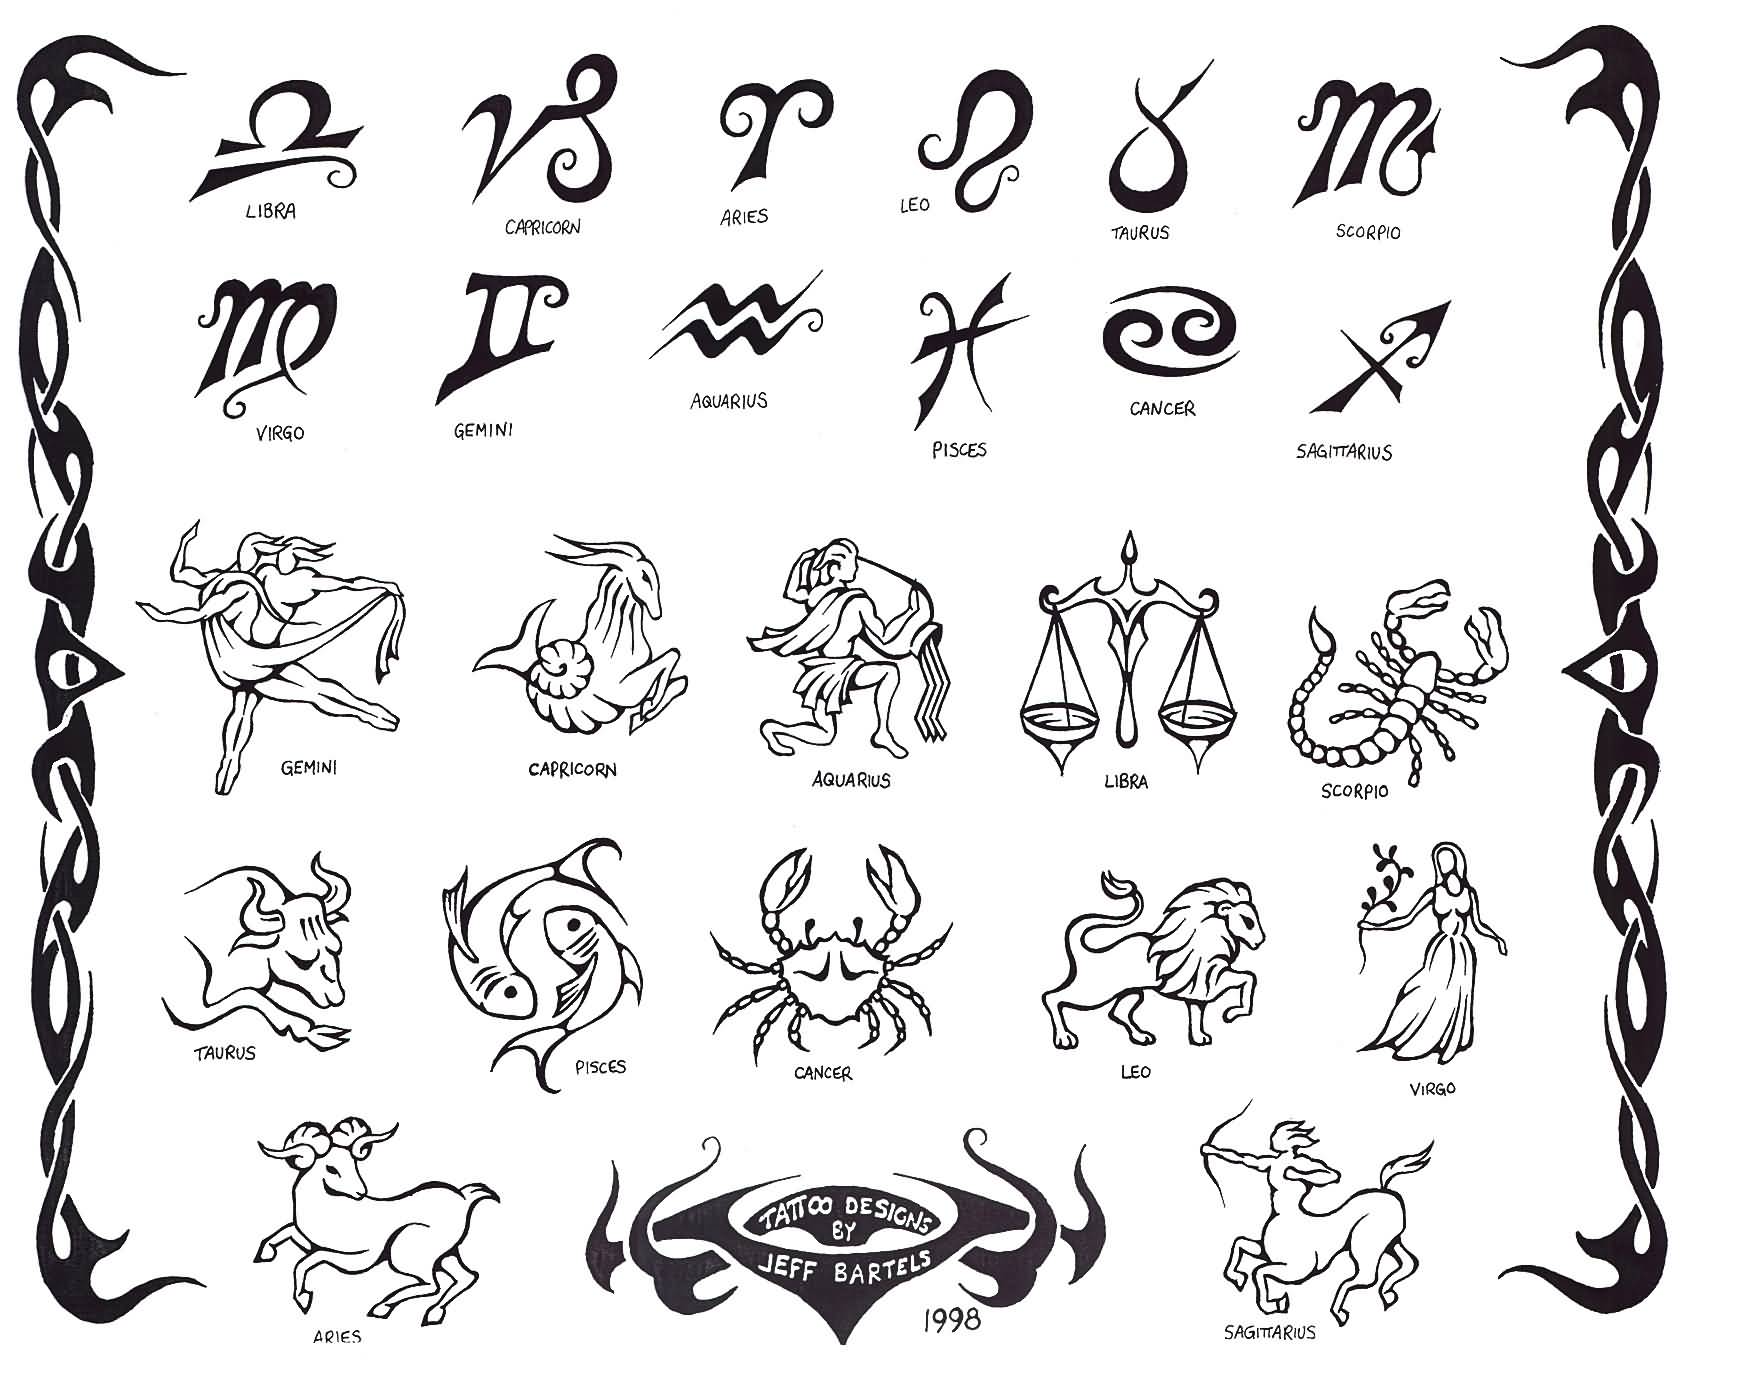 Awesome Black Zodiac Sign And Symbol Tattoo Flash By Jeff Bartels